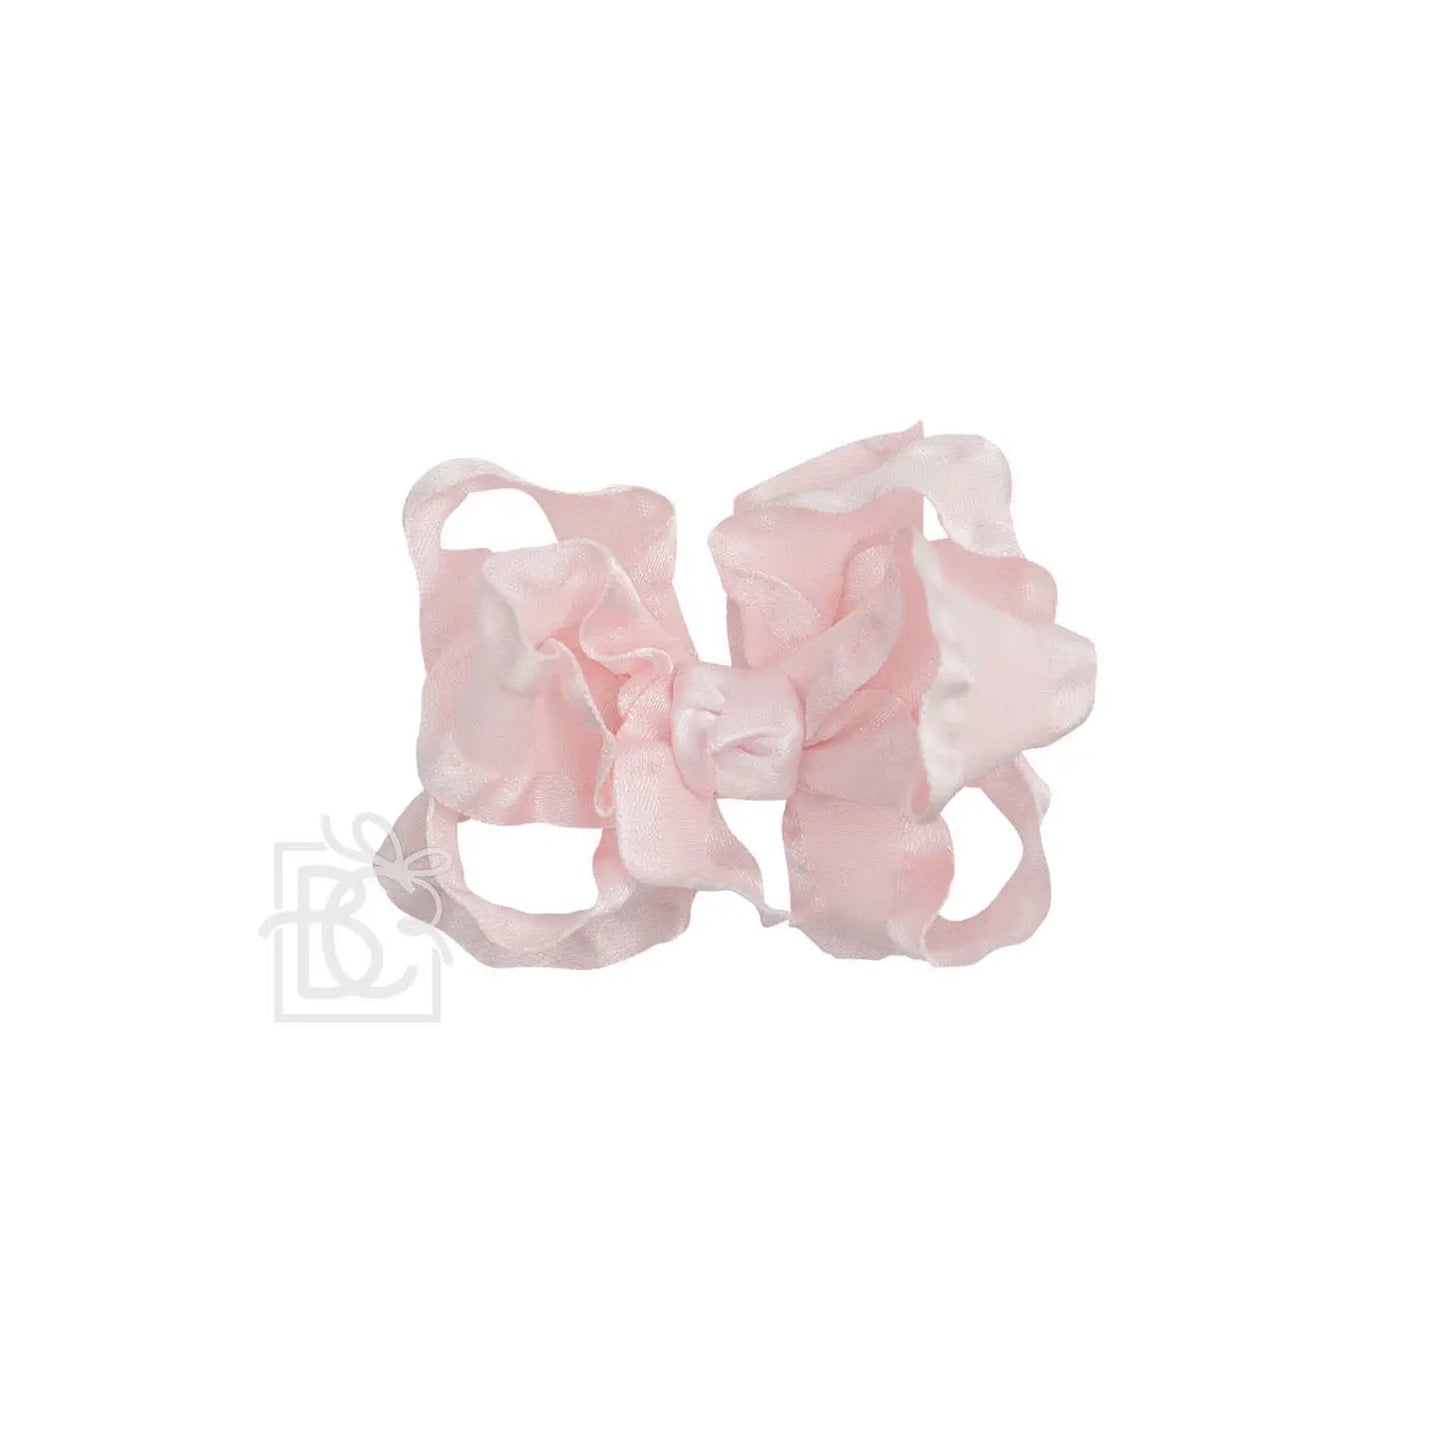 Double Ruffle Bow on Alligator Clip-light pink